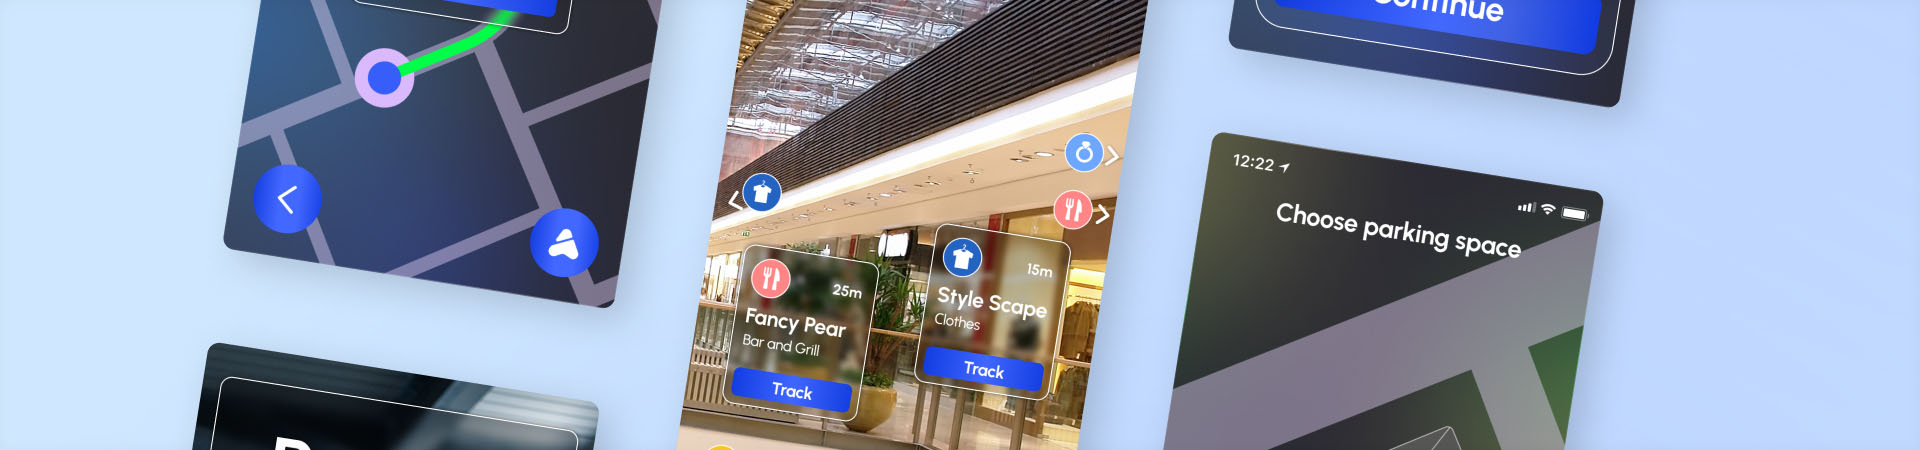 Retail App with GPS and AR Functionality to Enhance Shopping Mall Experience 